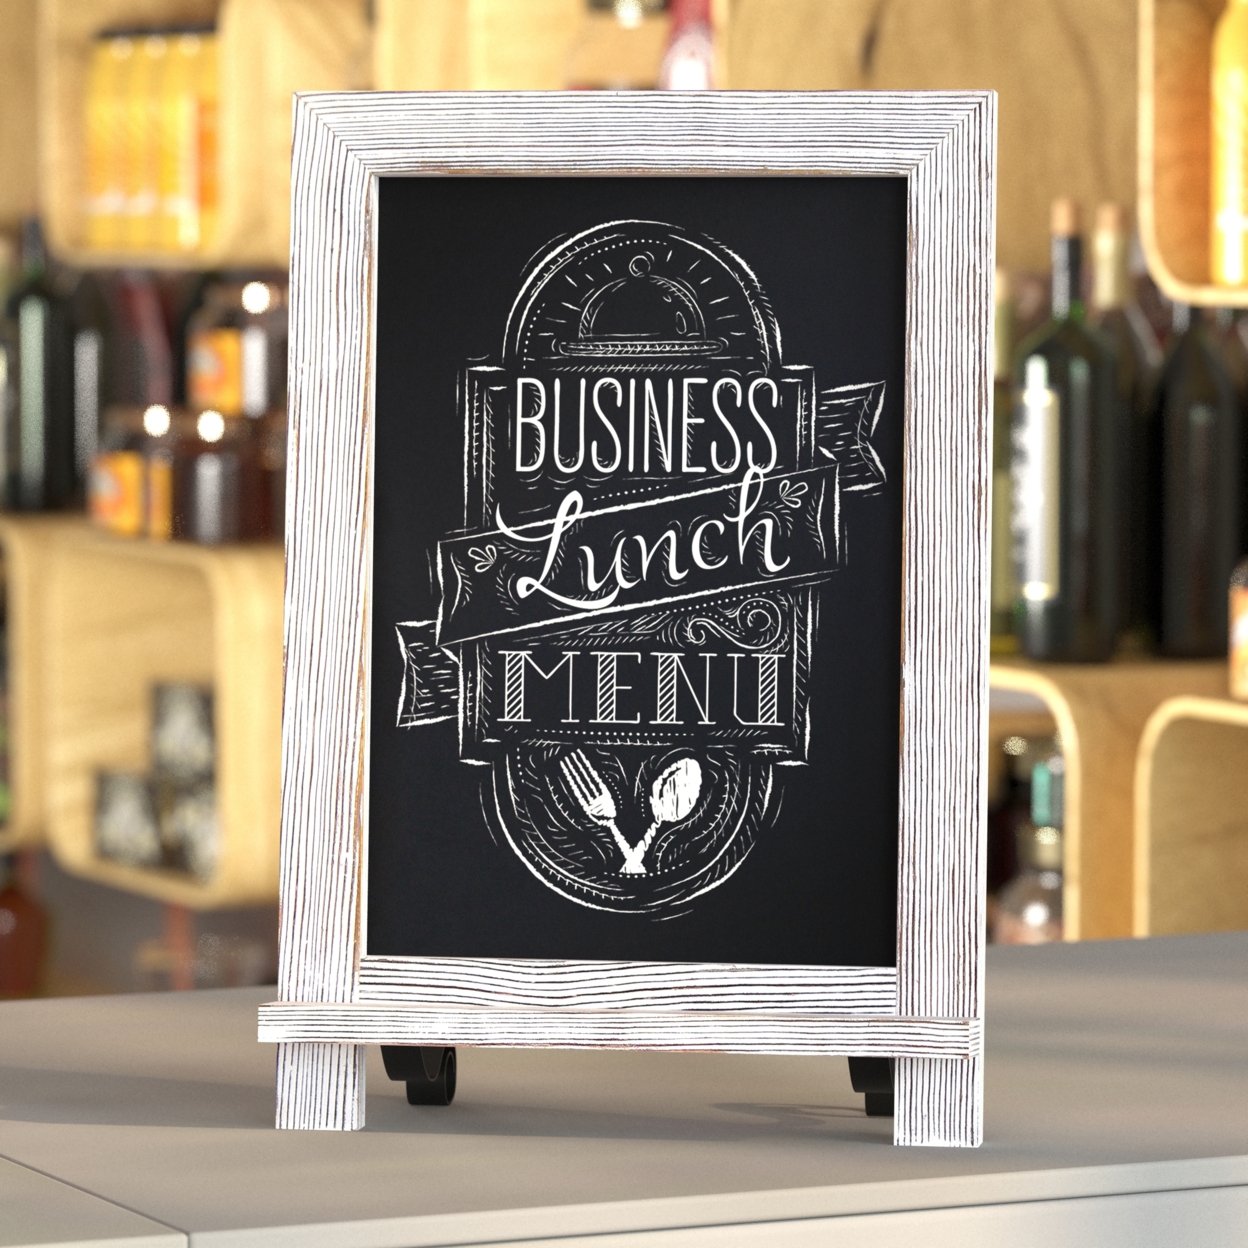 Magnetic Chalkboard, Washed White Wood Frame, Metal Scrolled Legs